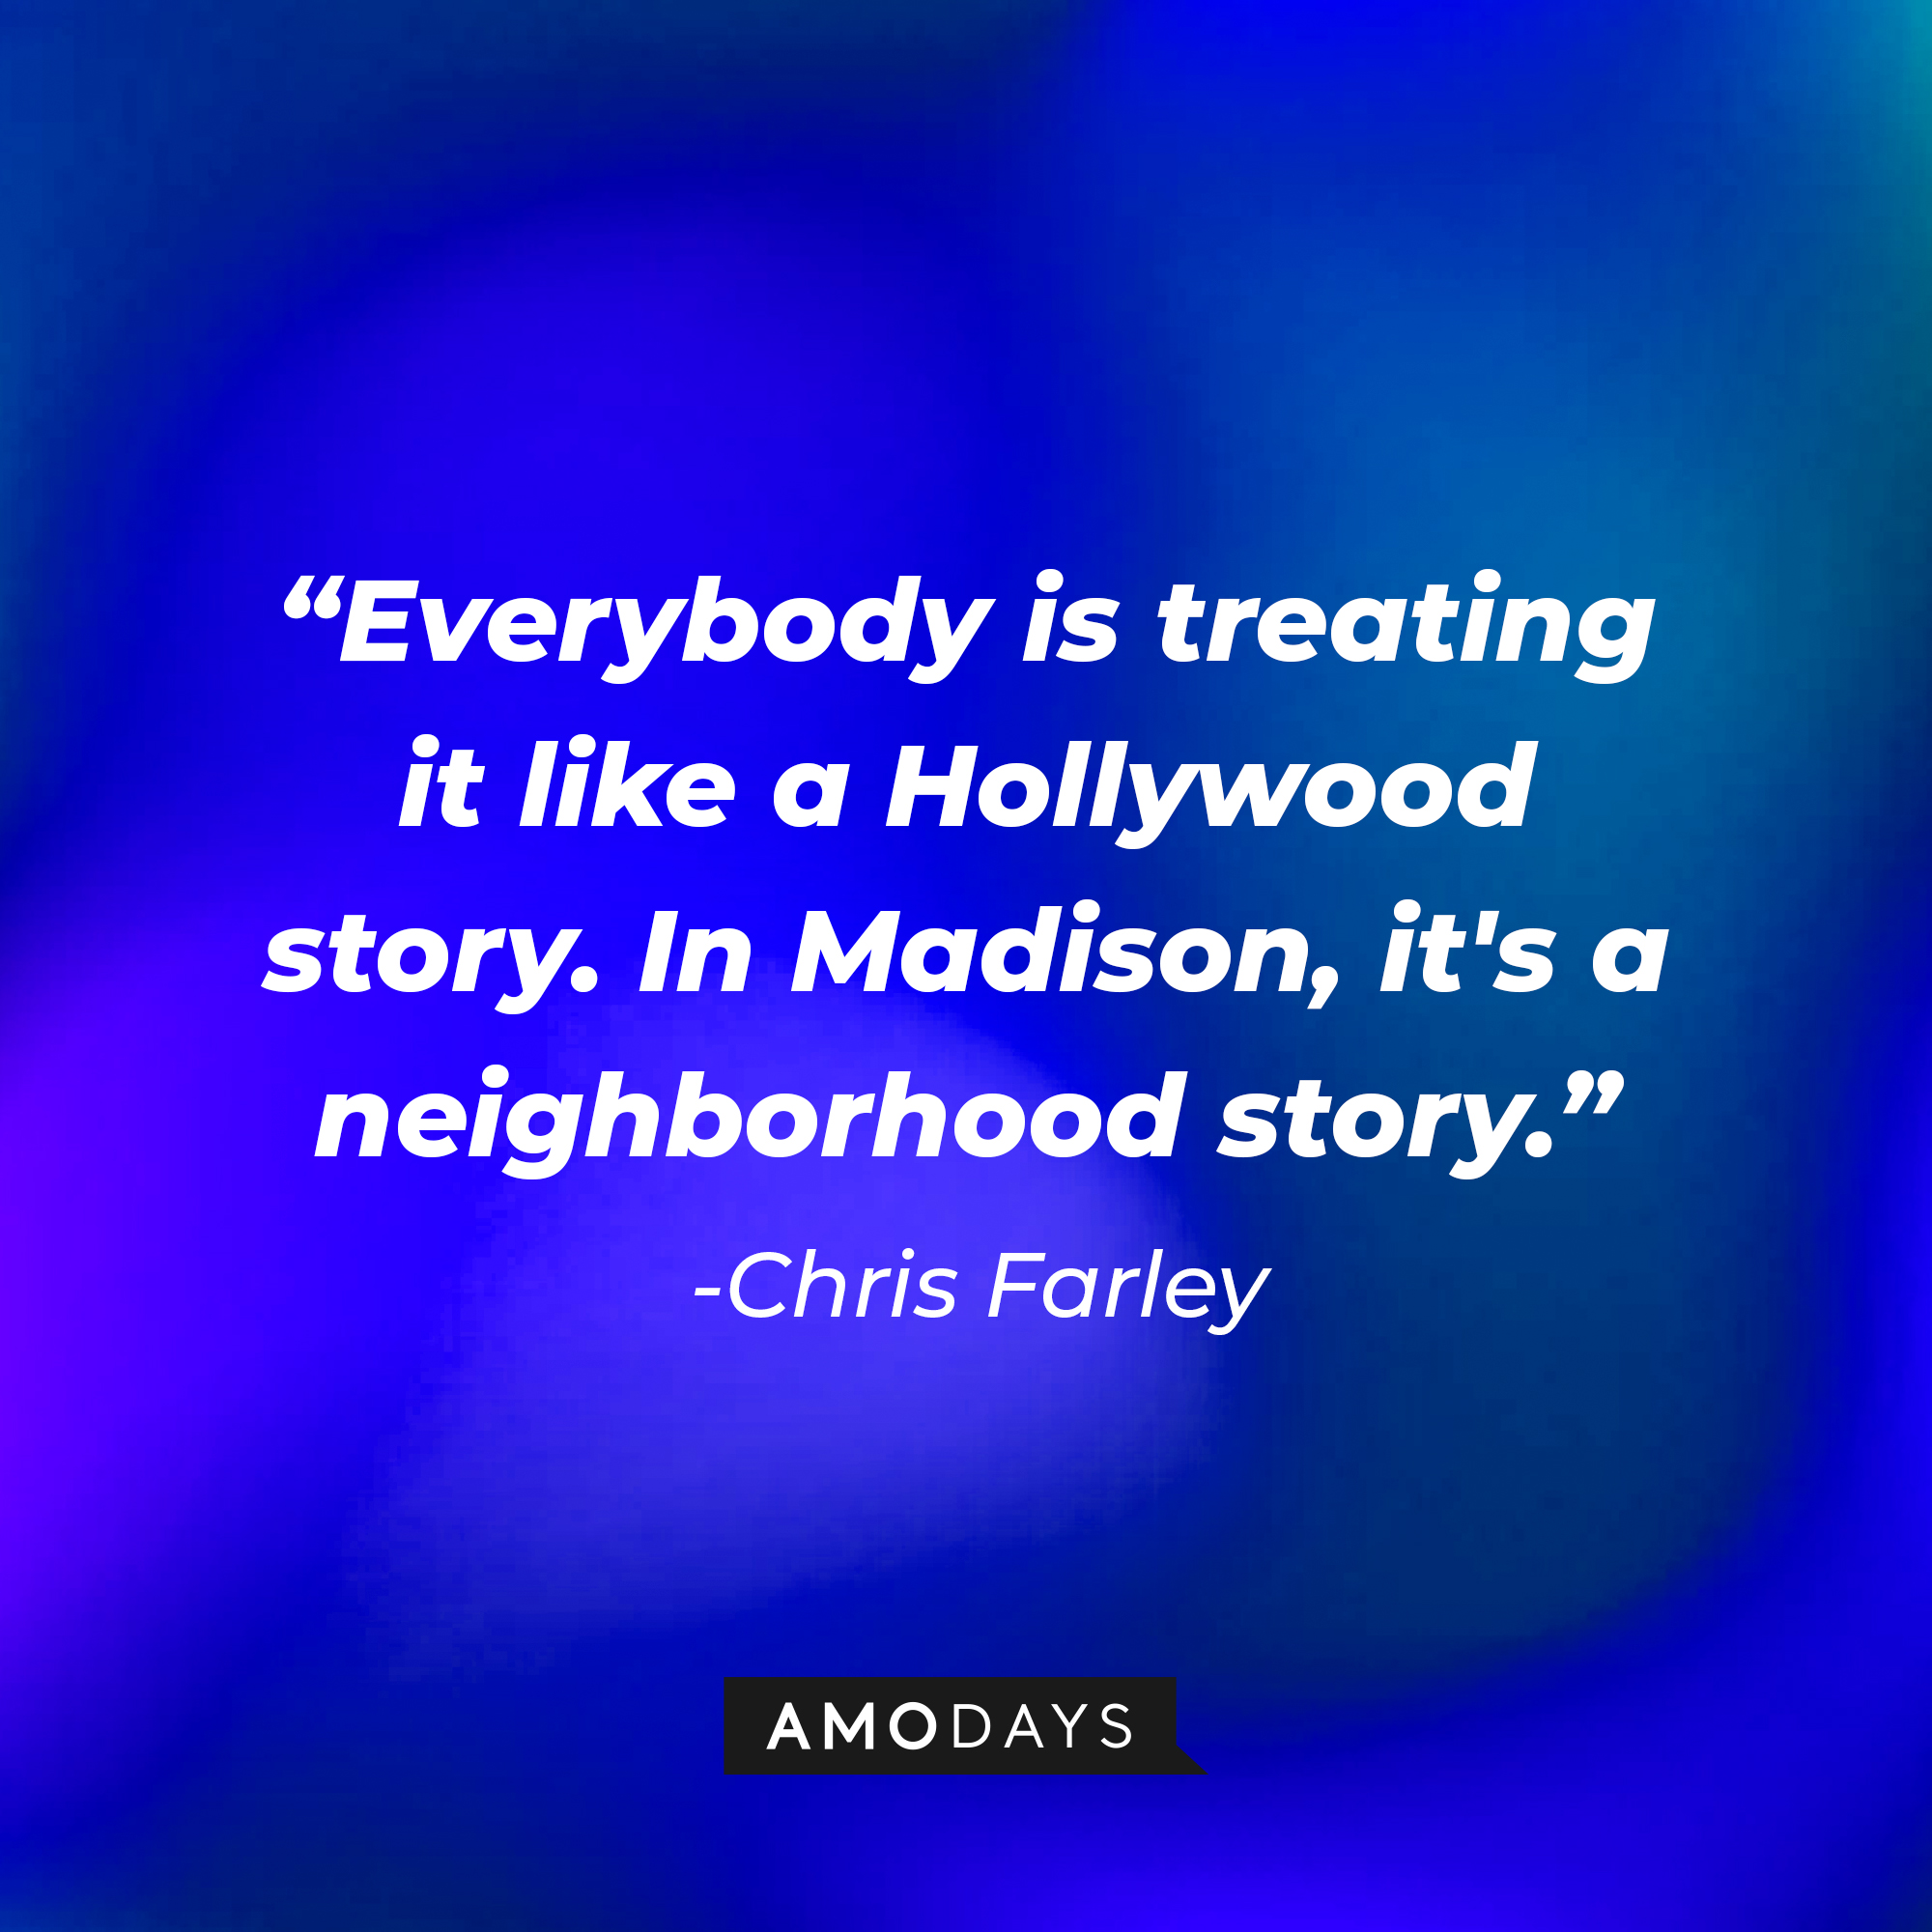 Chris Farley's quote: "Everybody is treating it like a Hollywood story. In Madison, it's a neighborhood story." | Source: Amodays